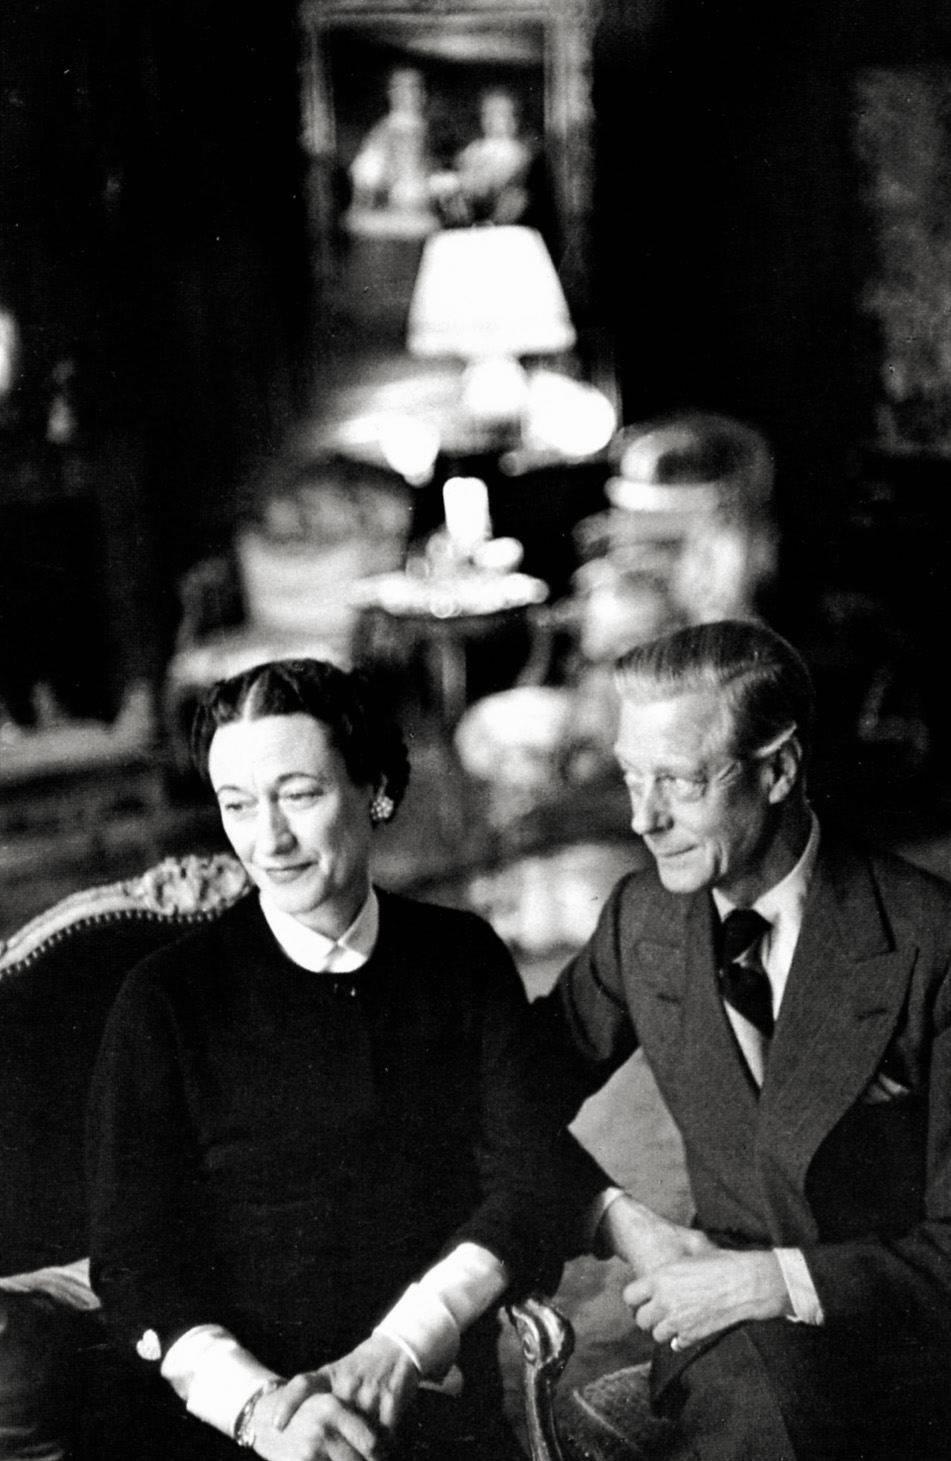 Henri Cartier-Bresson Black and White Photograph - The Duke and Duchess of Windsor